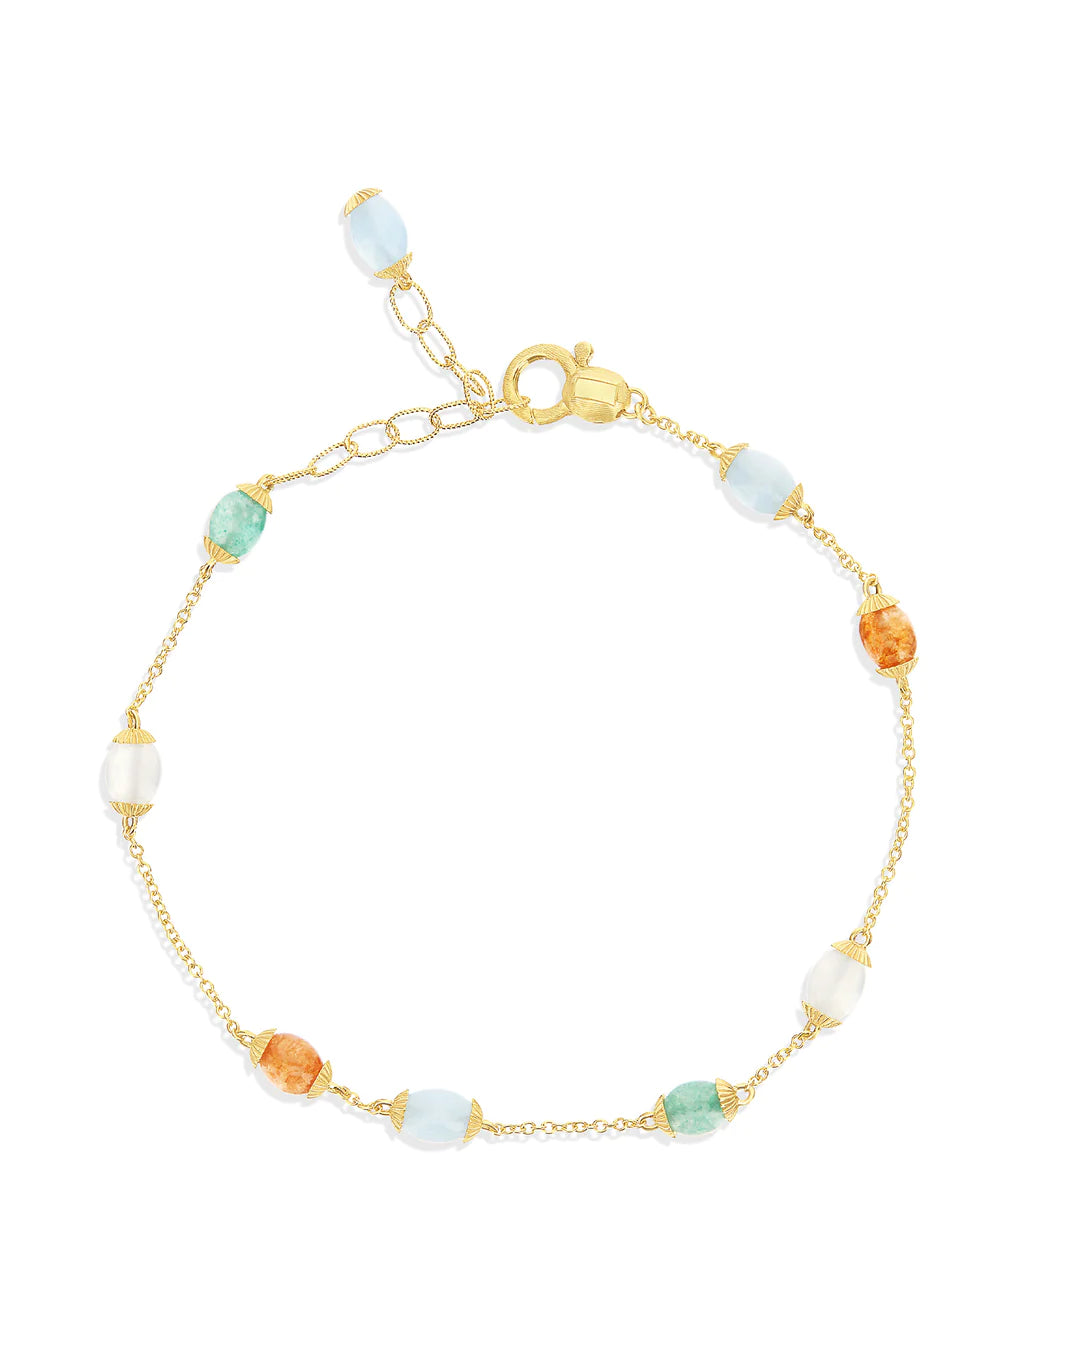 "RAINBOW" GOLD AND NATURAL STONES BRACELET